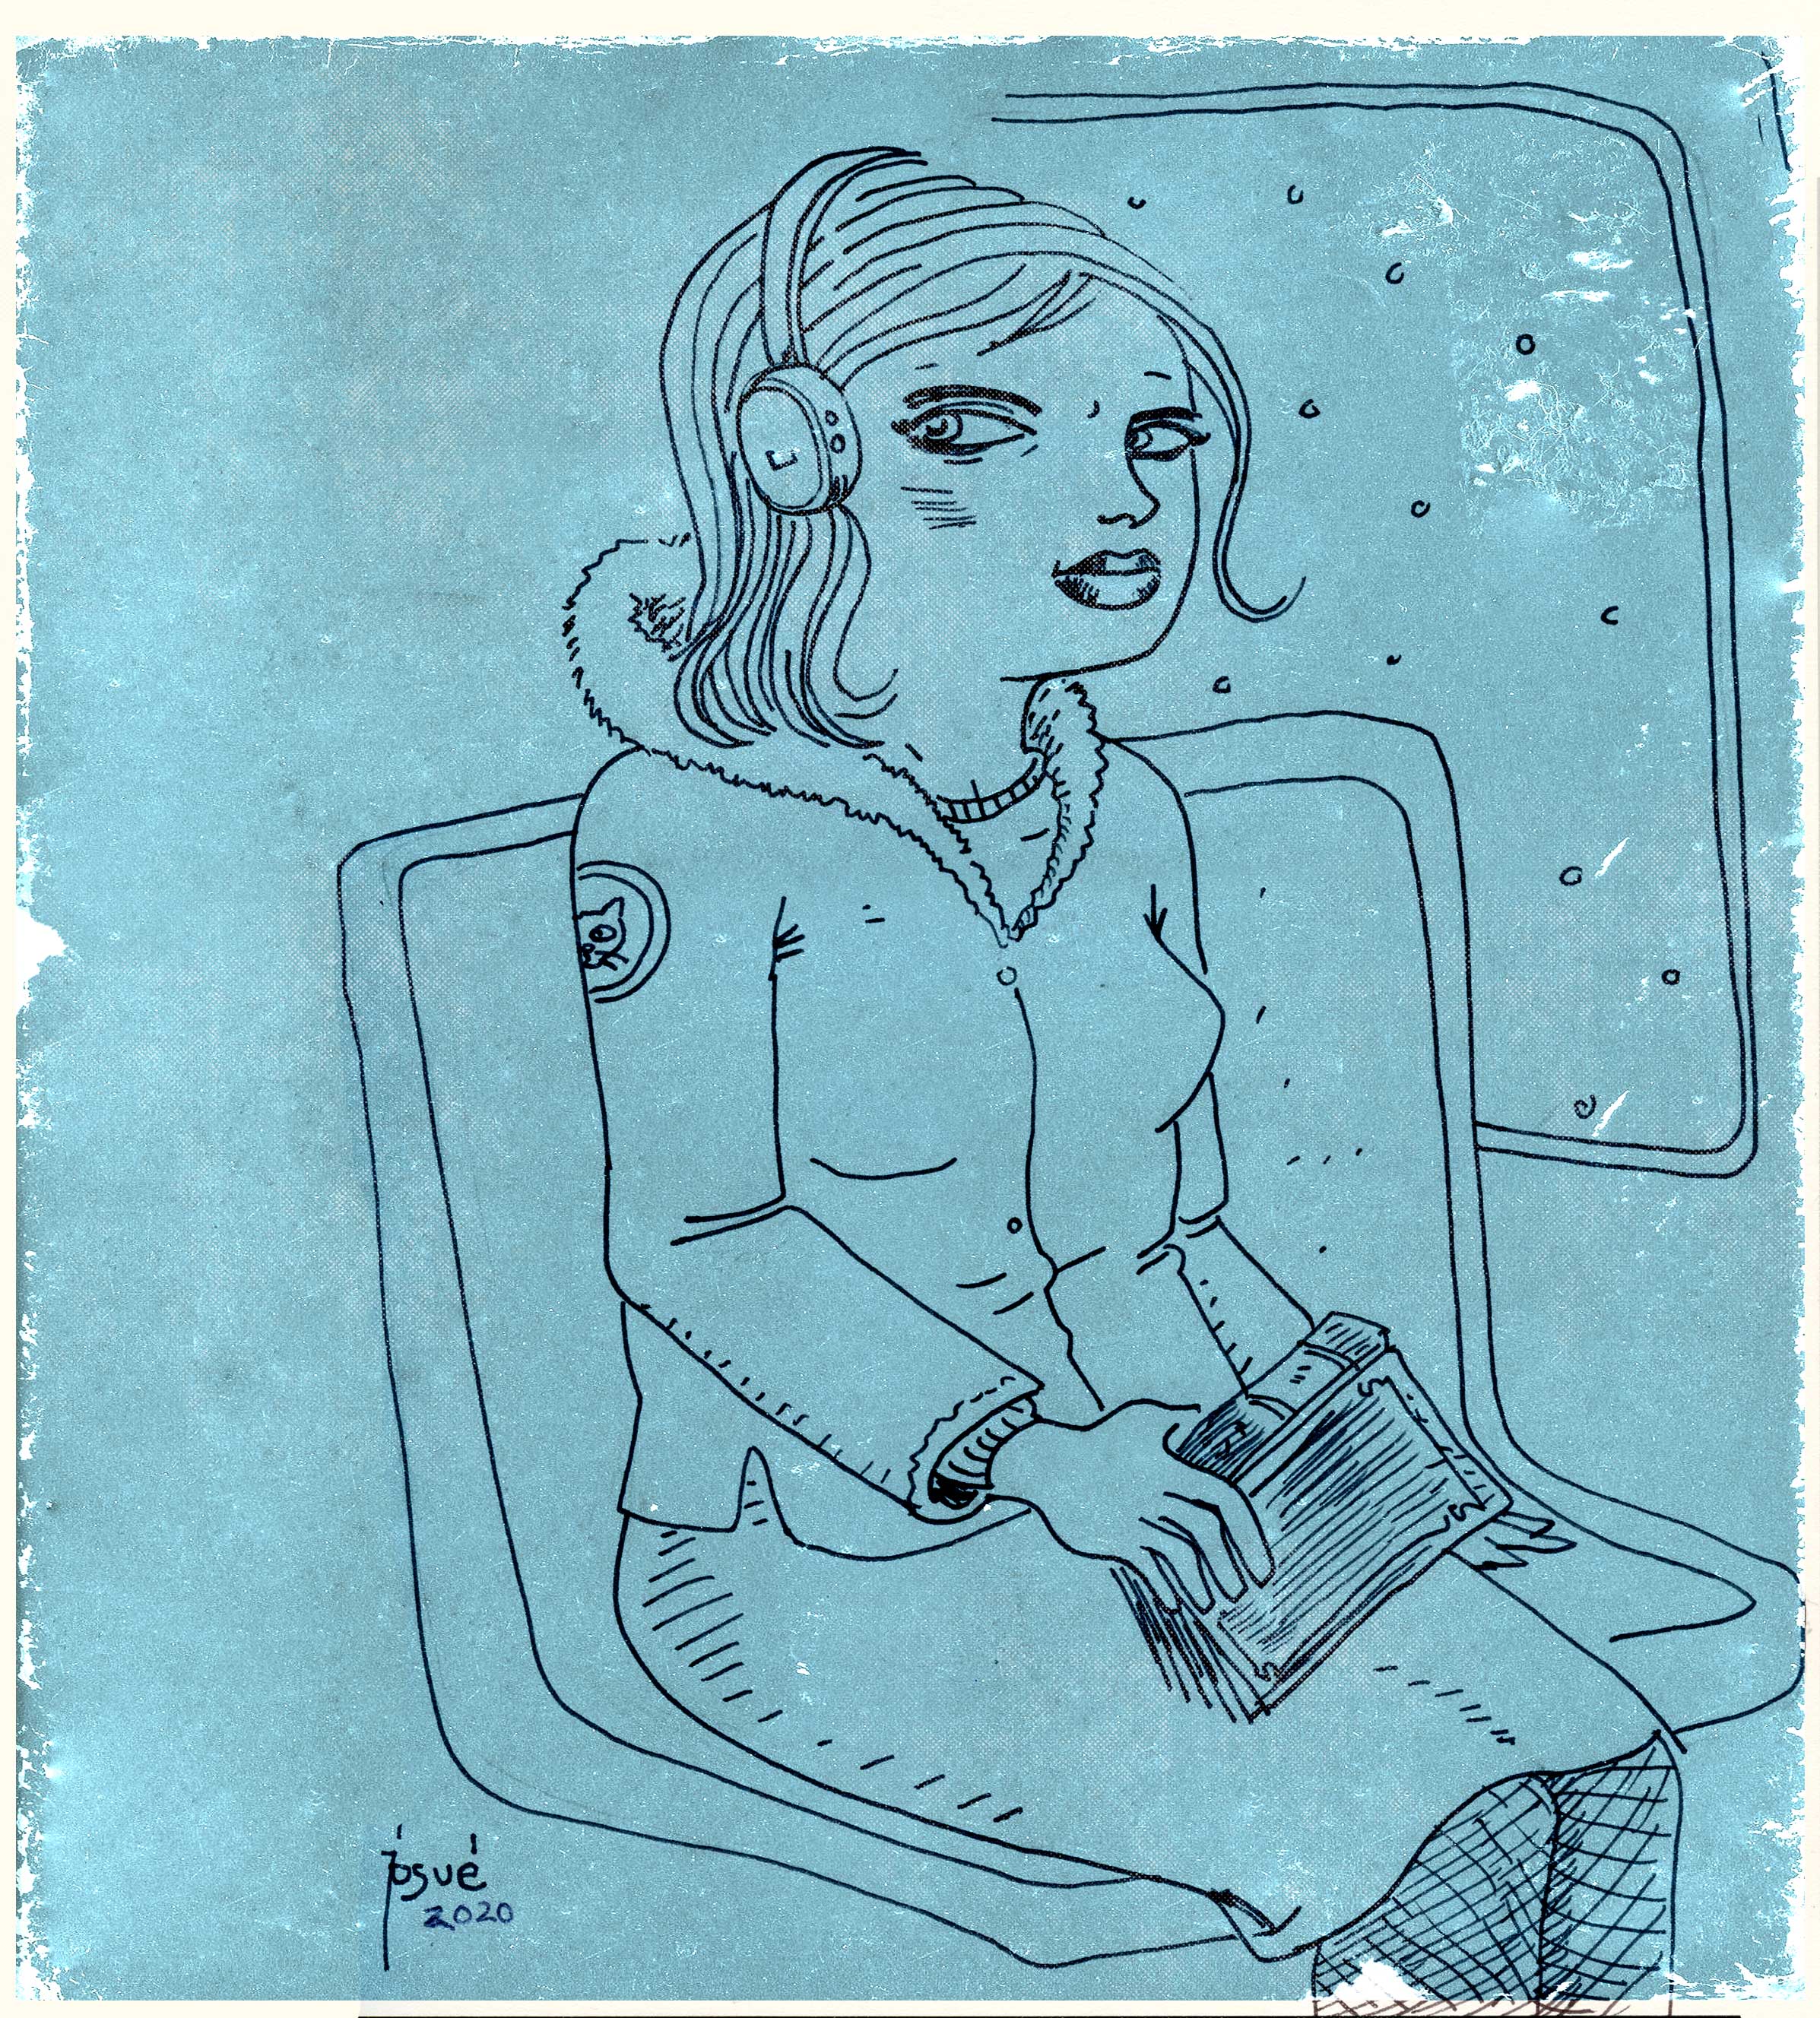 image of woman on the bus sitting alone.